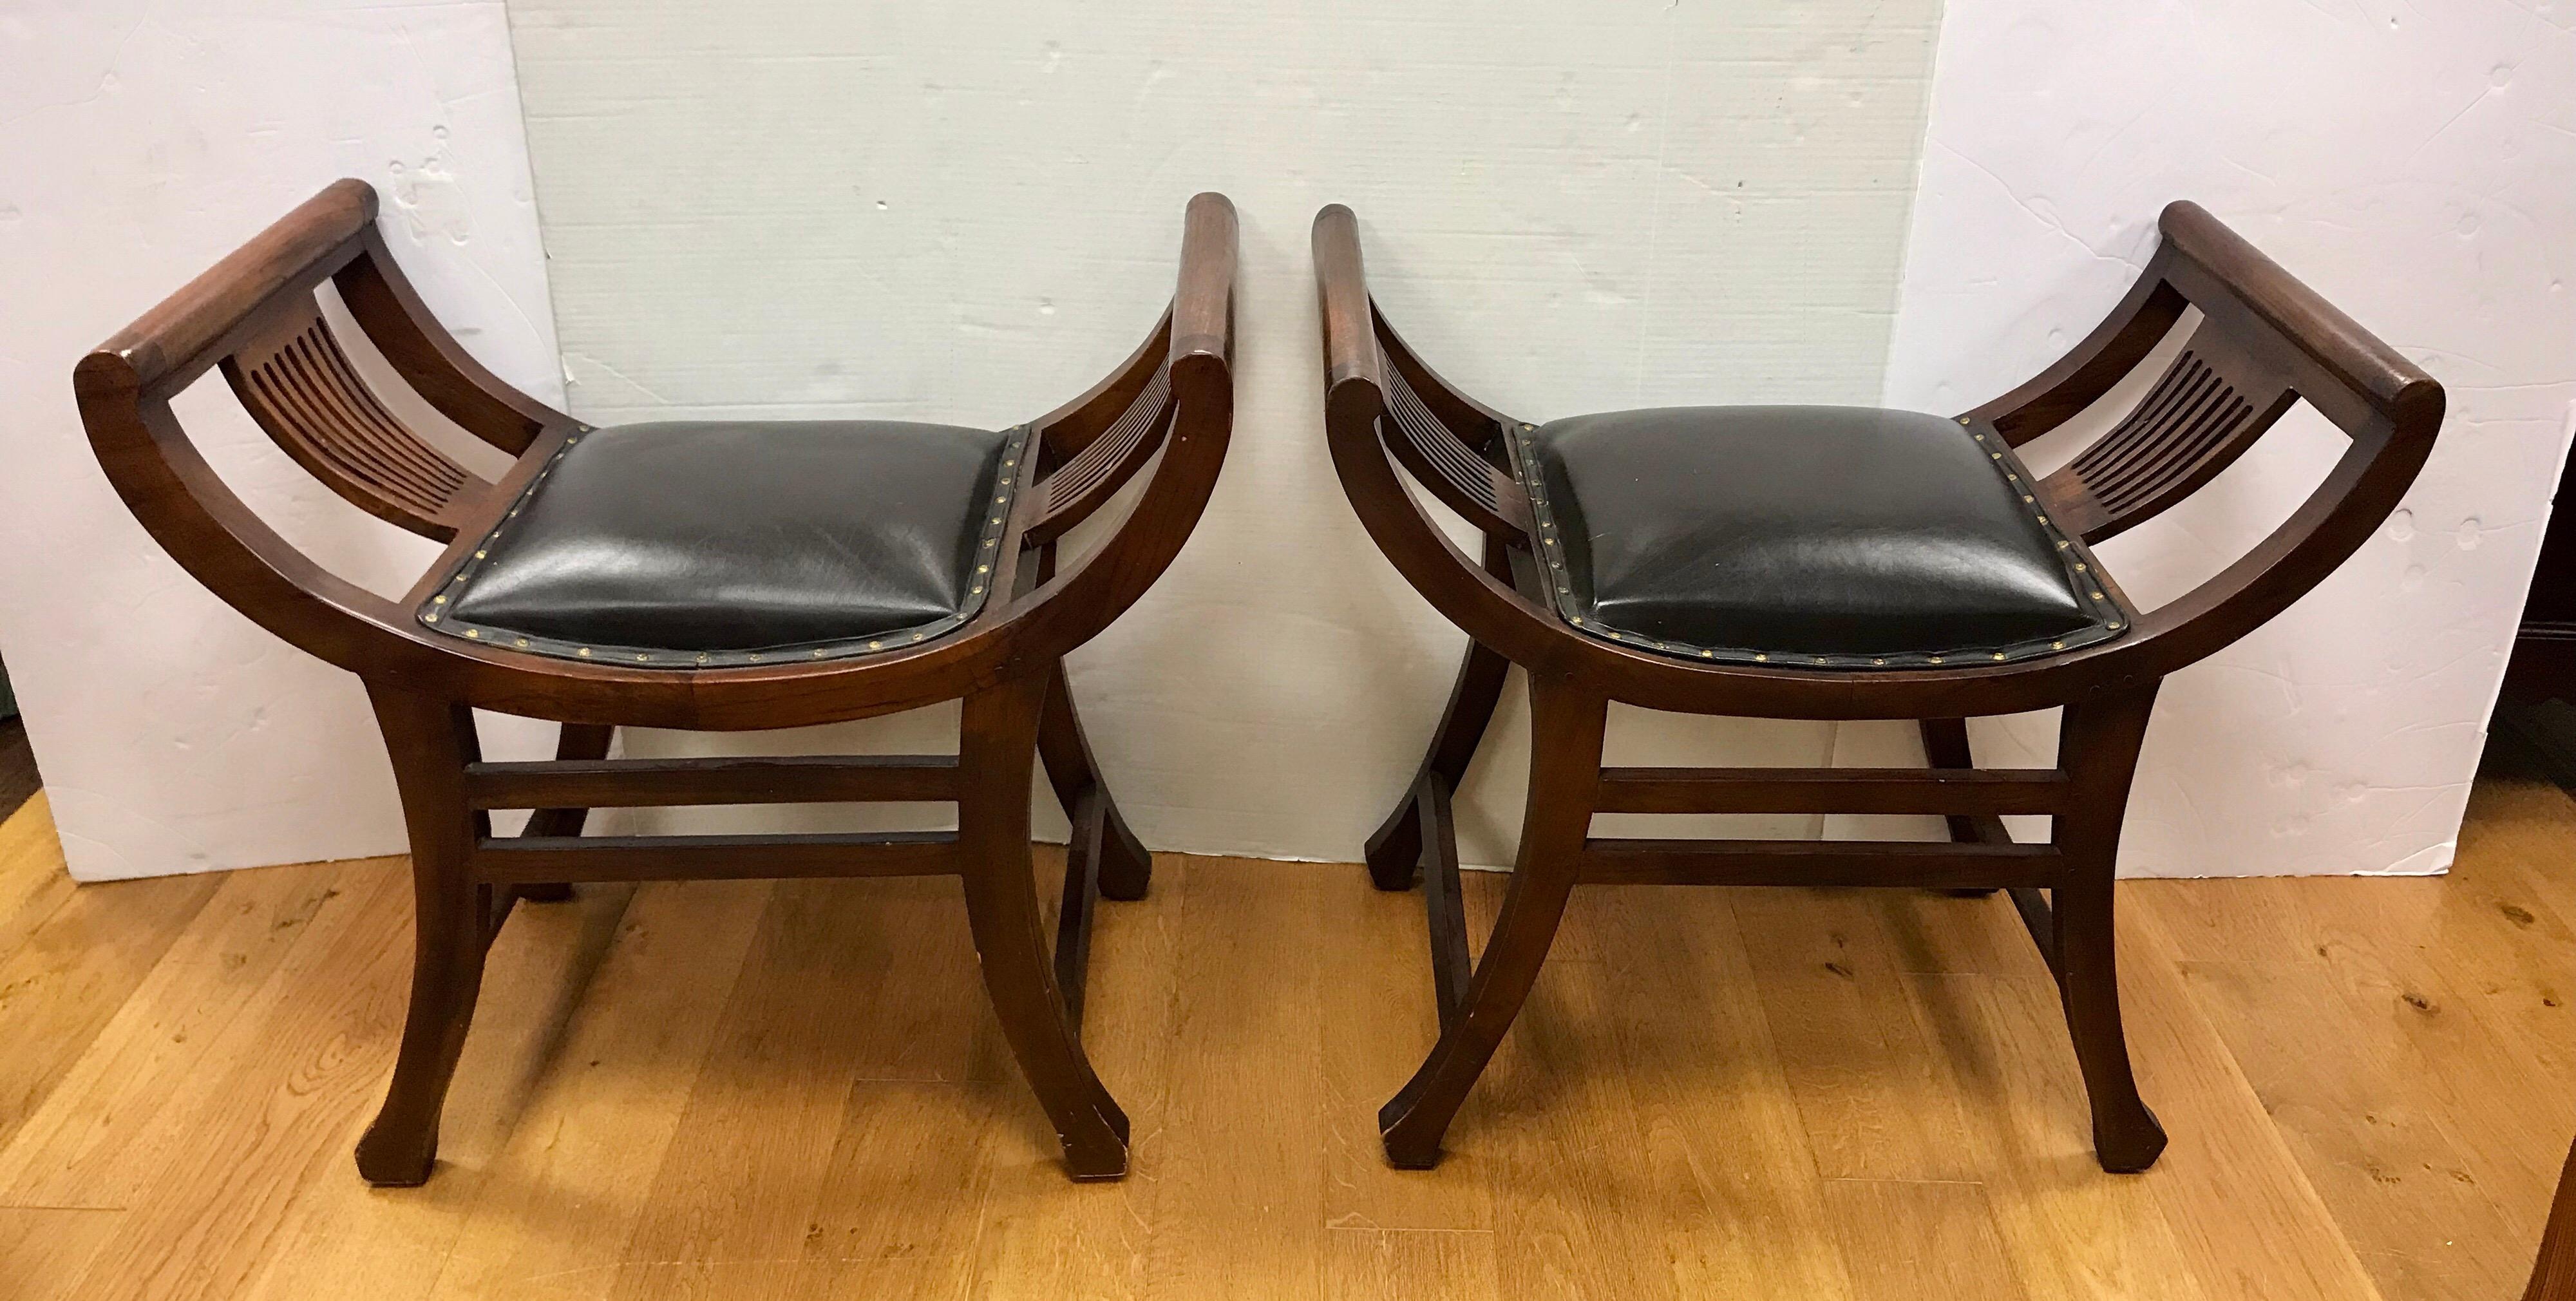 Coveted matching pair of English leather slatted benches or stools with black leather seats and studs. They are supported with a gorgeous mahogany frame, circa late 19th century, England.